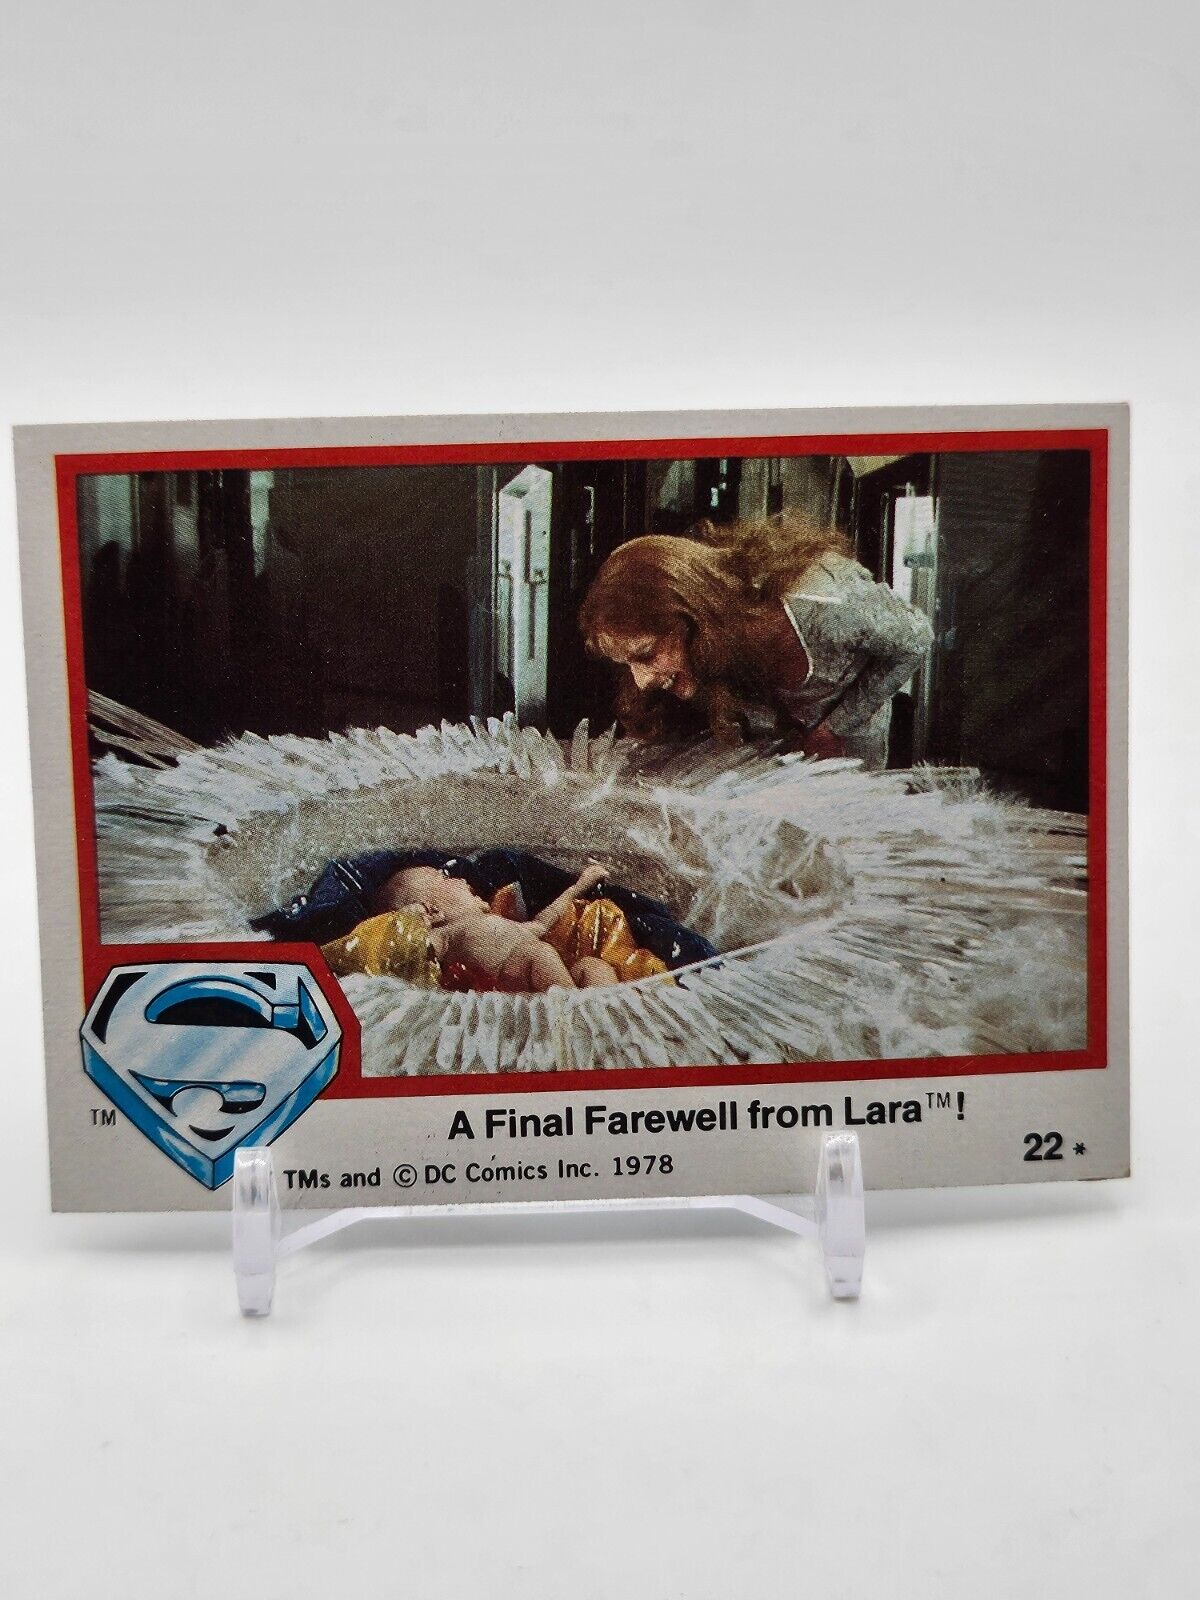 A Final Farewell from Lara 1978 Topps SUPERMAN The Movie #22 VINTAGE DC